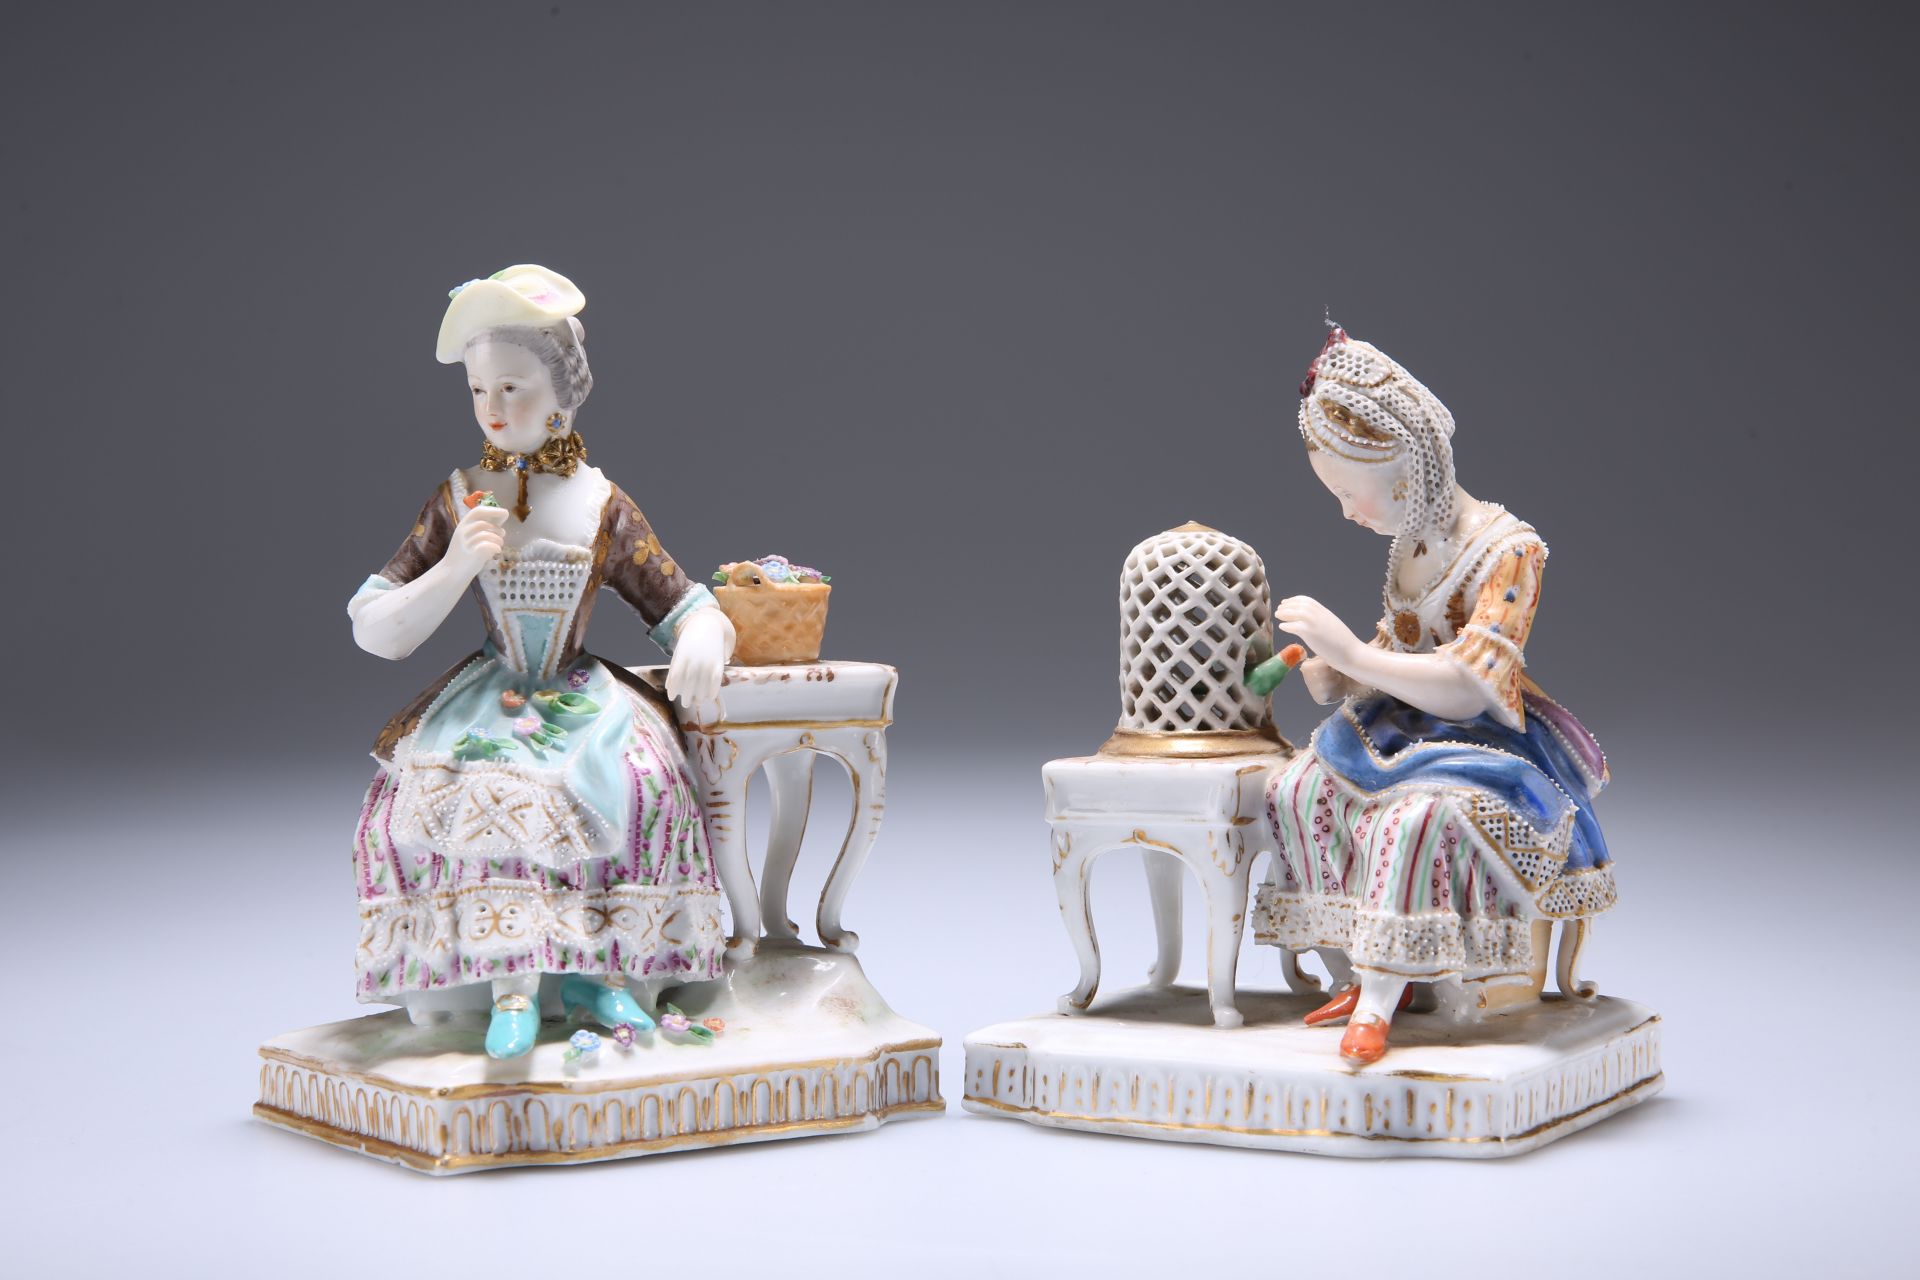 TWO DRESDEN FIGURES, LATE 19TH CENTURY